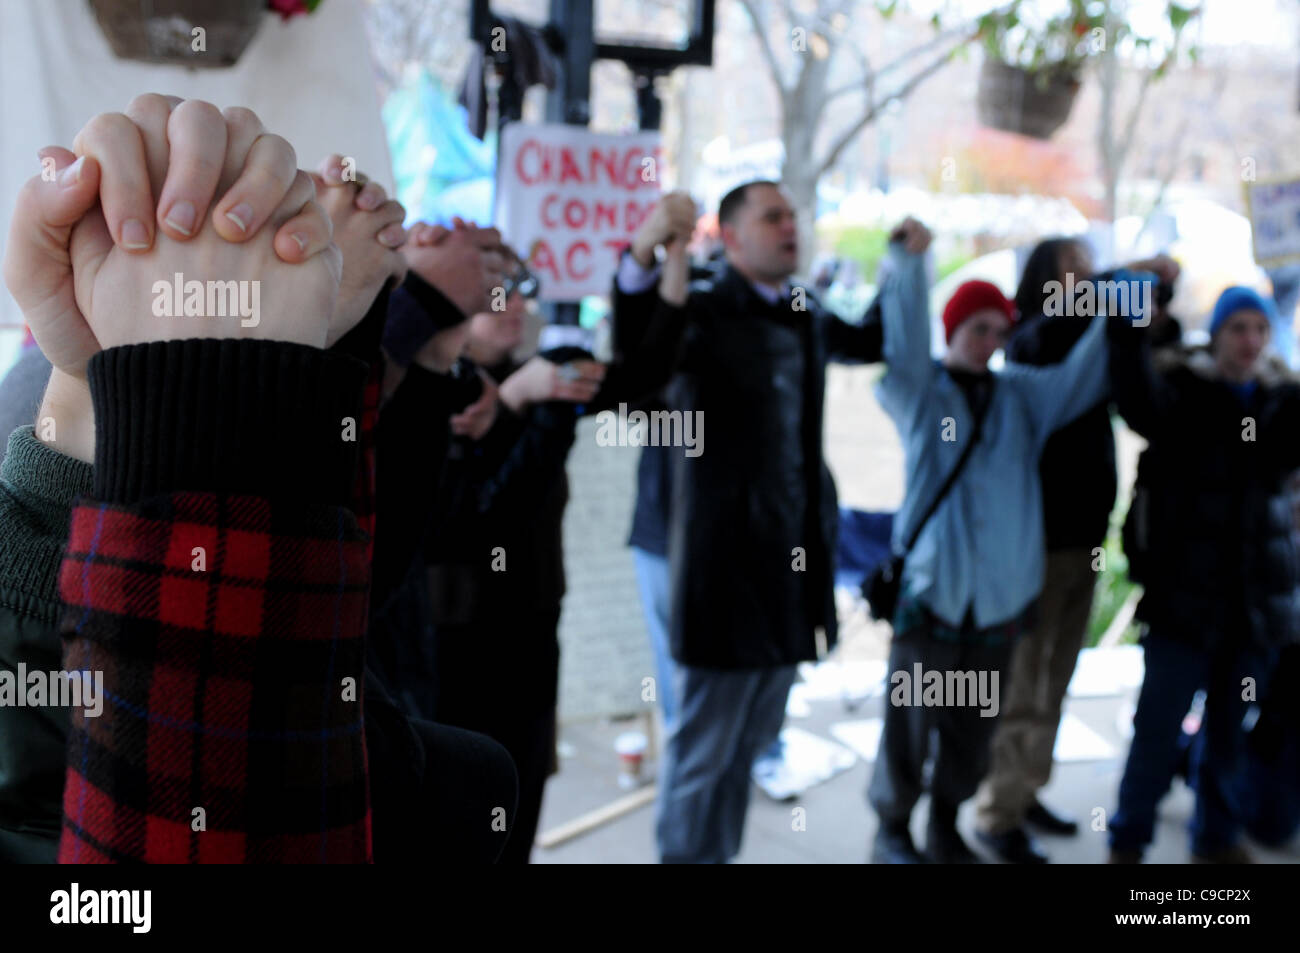 November 21, 2011, this morning Occupy Toronto protesters form a circle and clasp hands at St. James Park following a decision handed down earlier today by Ontario Superior Court judge David Brown, upholding the Occupy Toronto tent camp eviction. Stock Photo